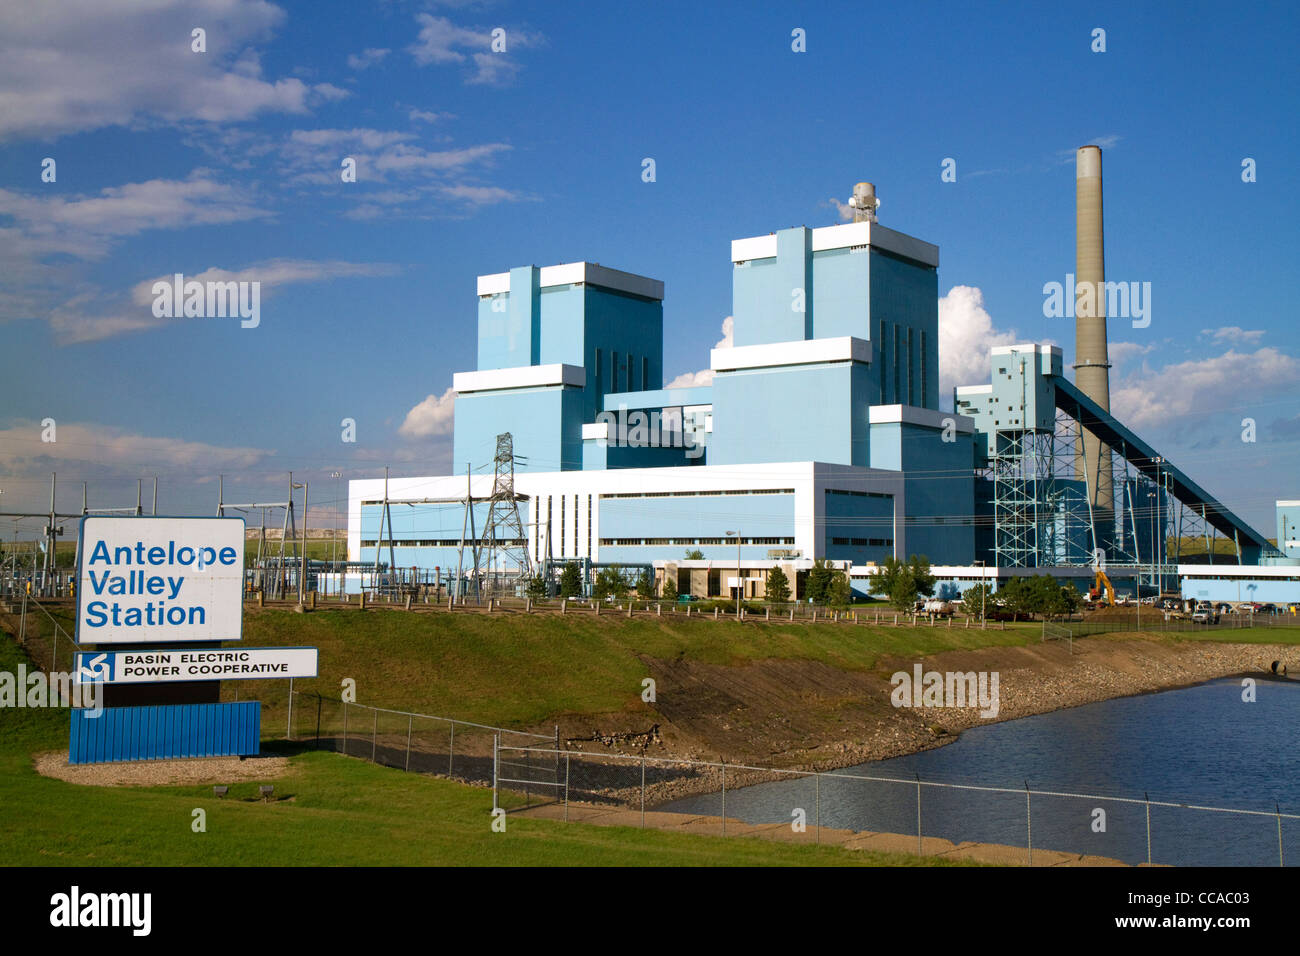 Antelope Valley Station is a coal-based power plant located near Beulah, North Dakota, USA. Stock Photo